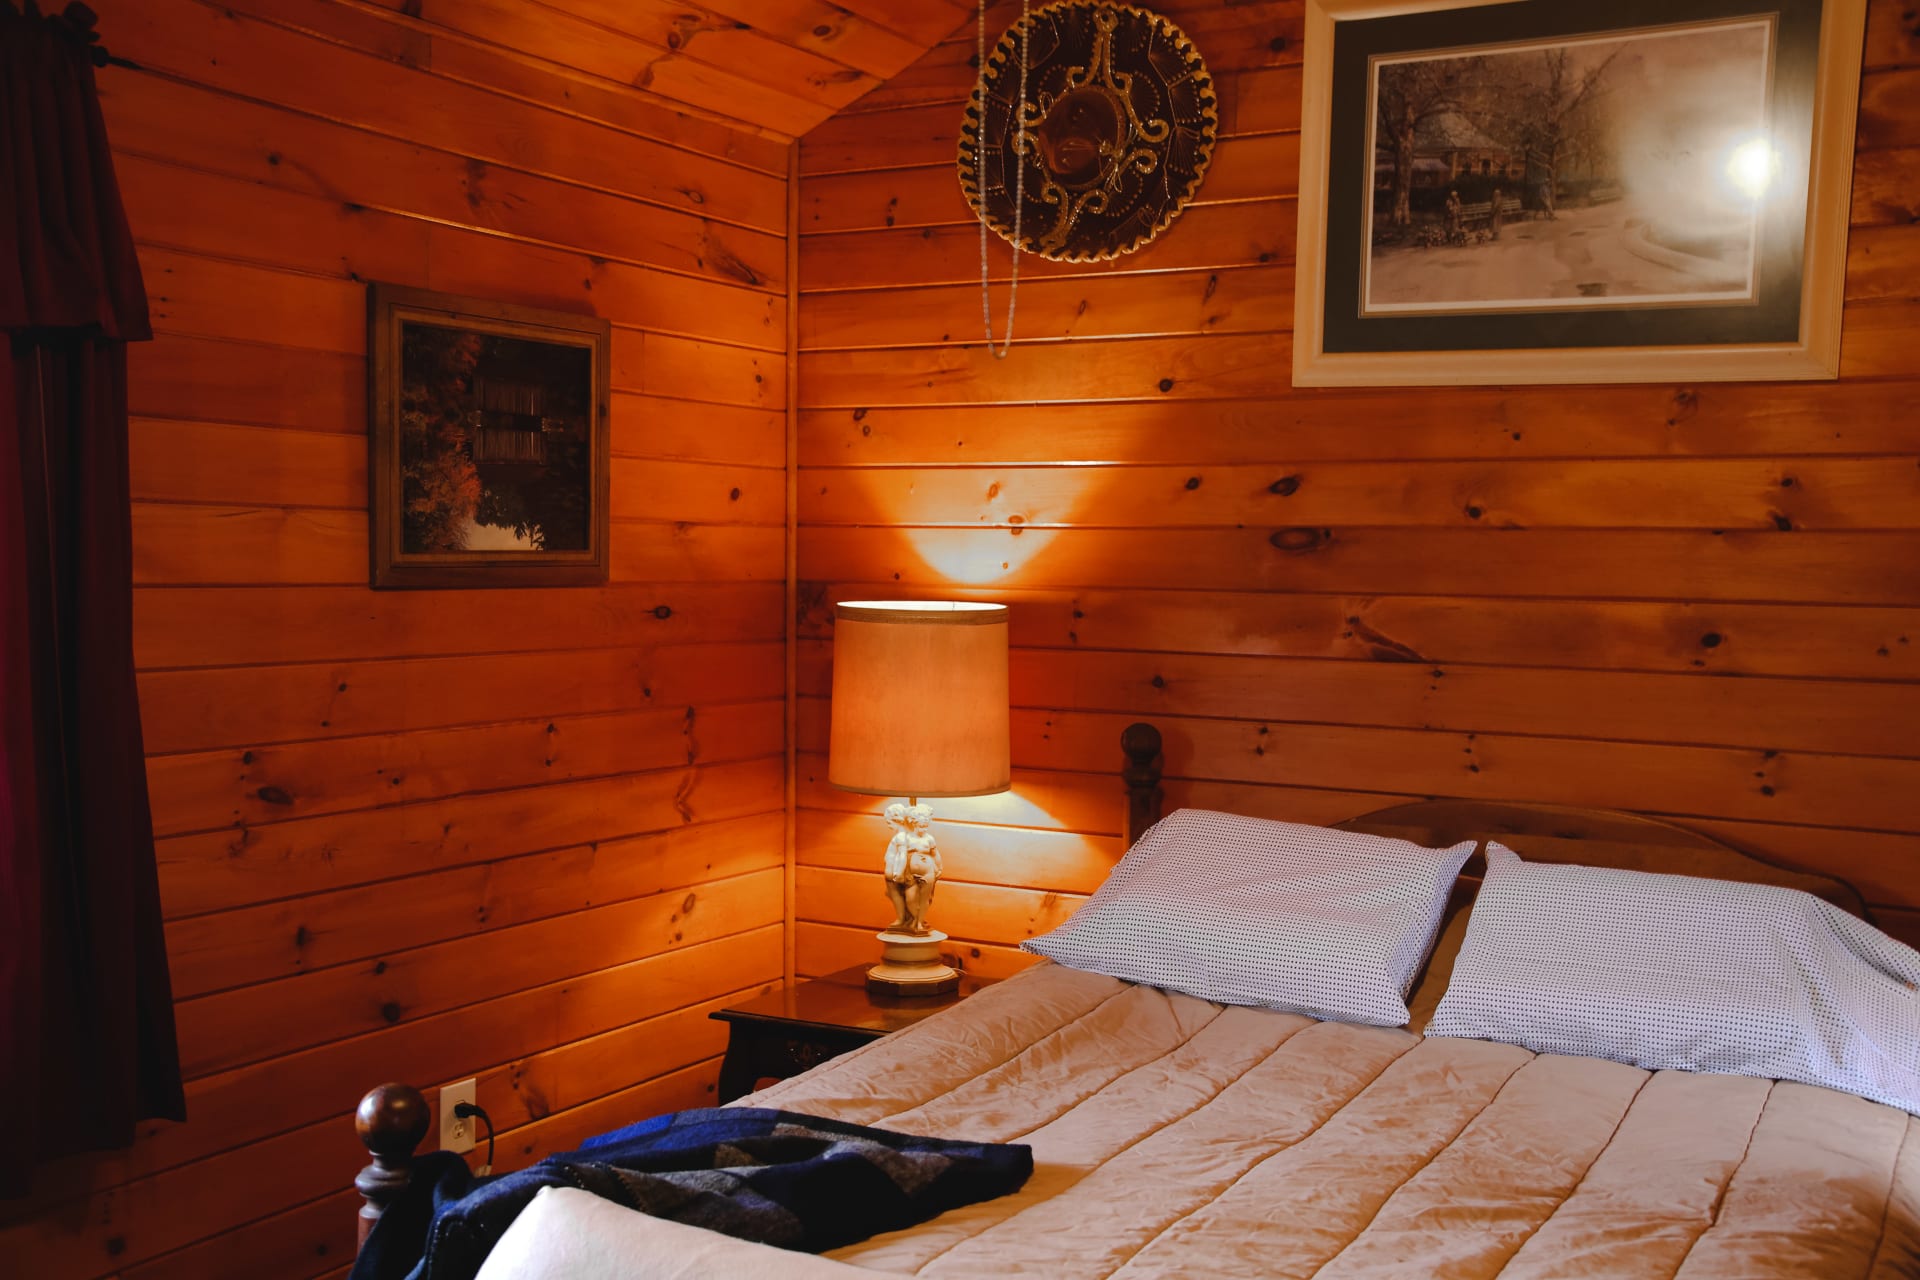 The cabin is decorated with a western and rustic style. Beautiful paneled wood grace the walls and ceiling. 